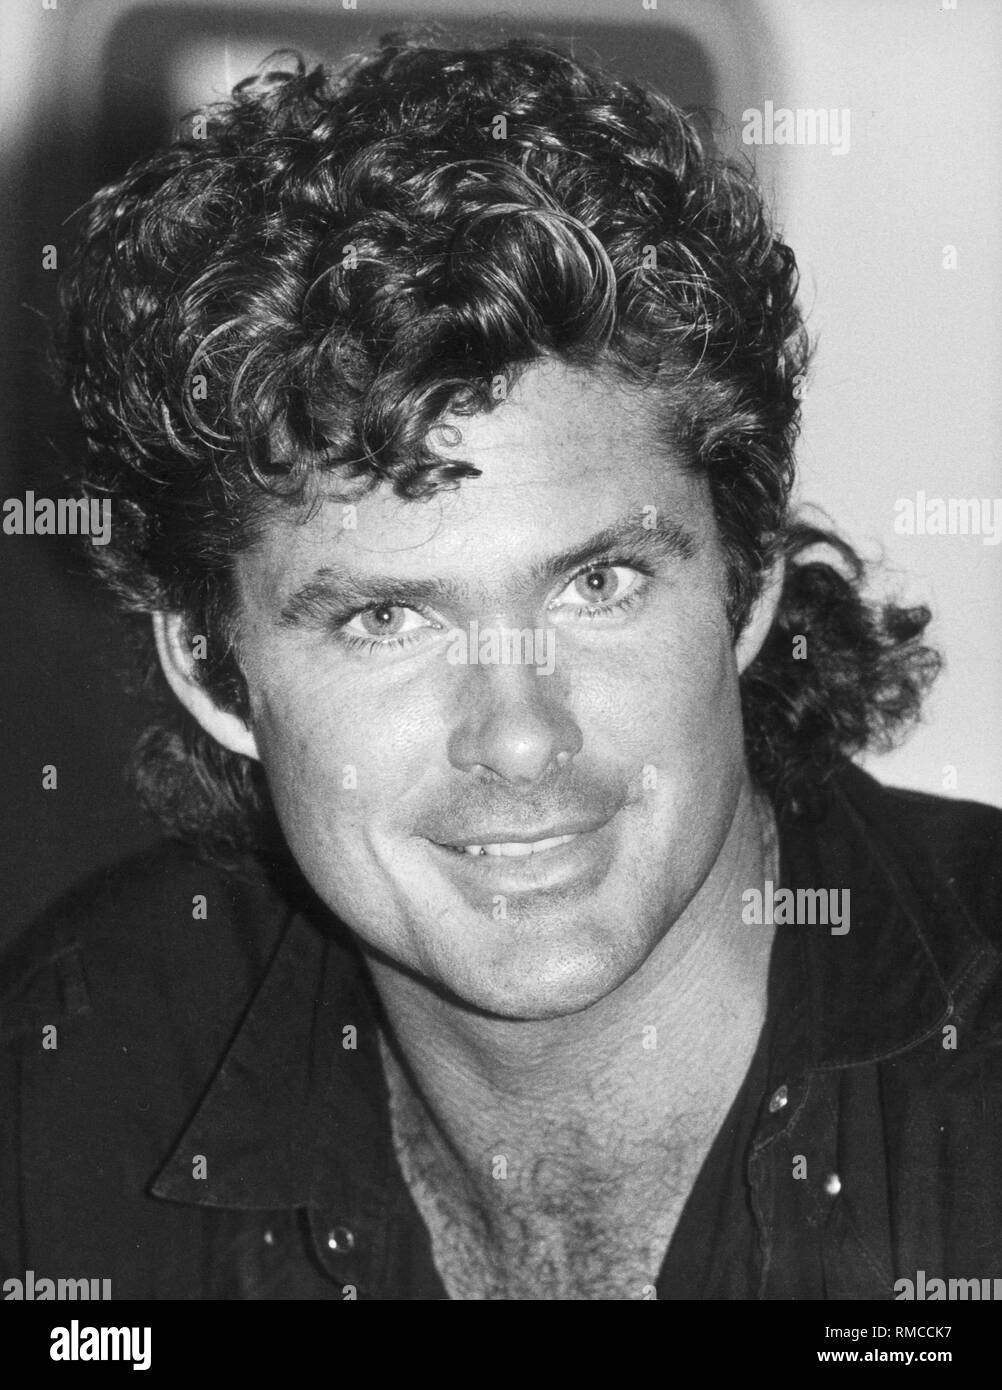 David Hasselhoff, an American actor and singer. Stock Photo